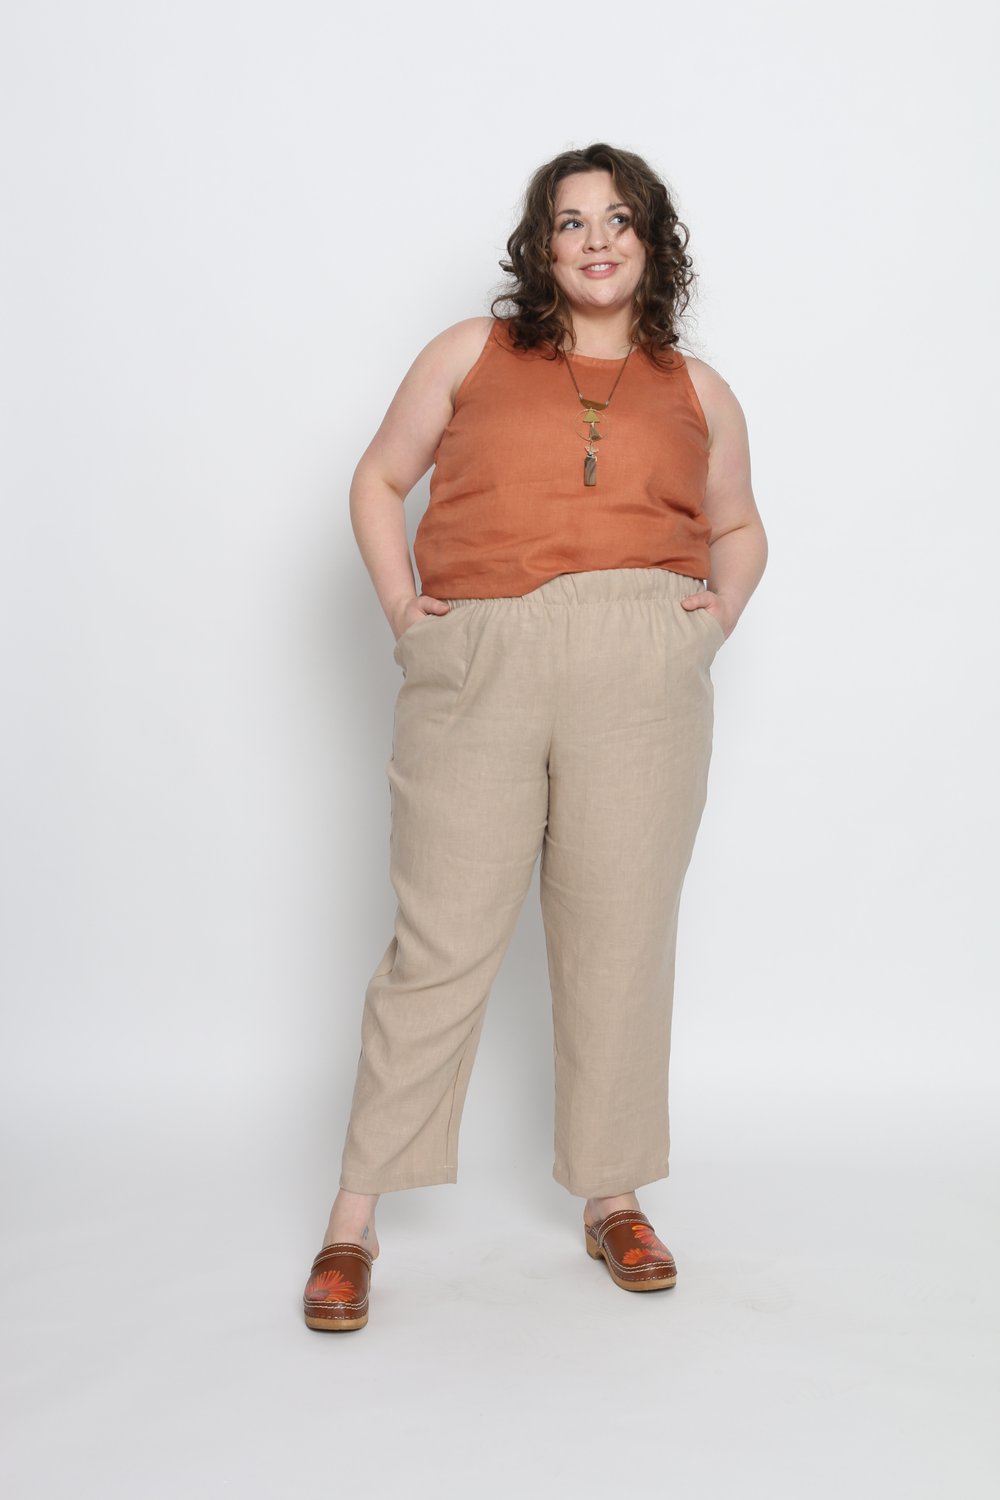 Amber is wearing an XL. Her measurements are: Height 5&#39;7&quot; | Bust 49&quot; | Waist 47&quot; | Hip 53&quot;